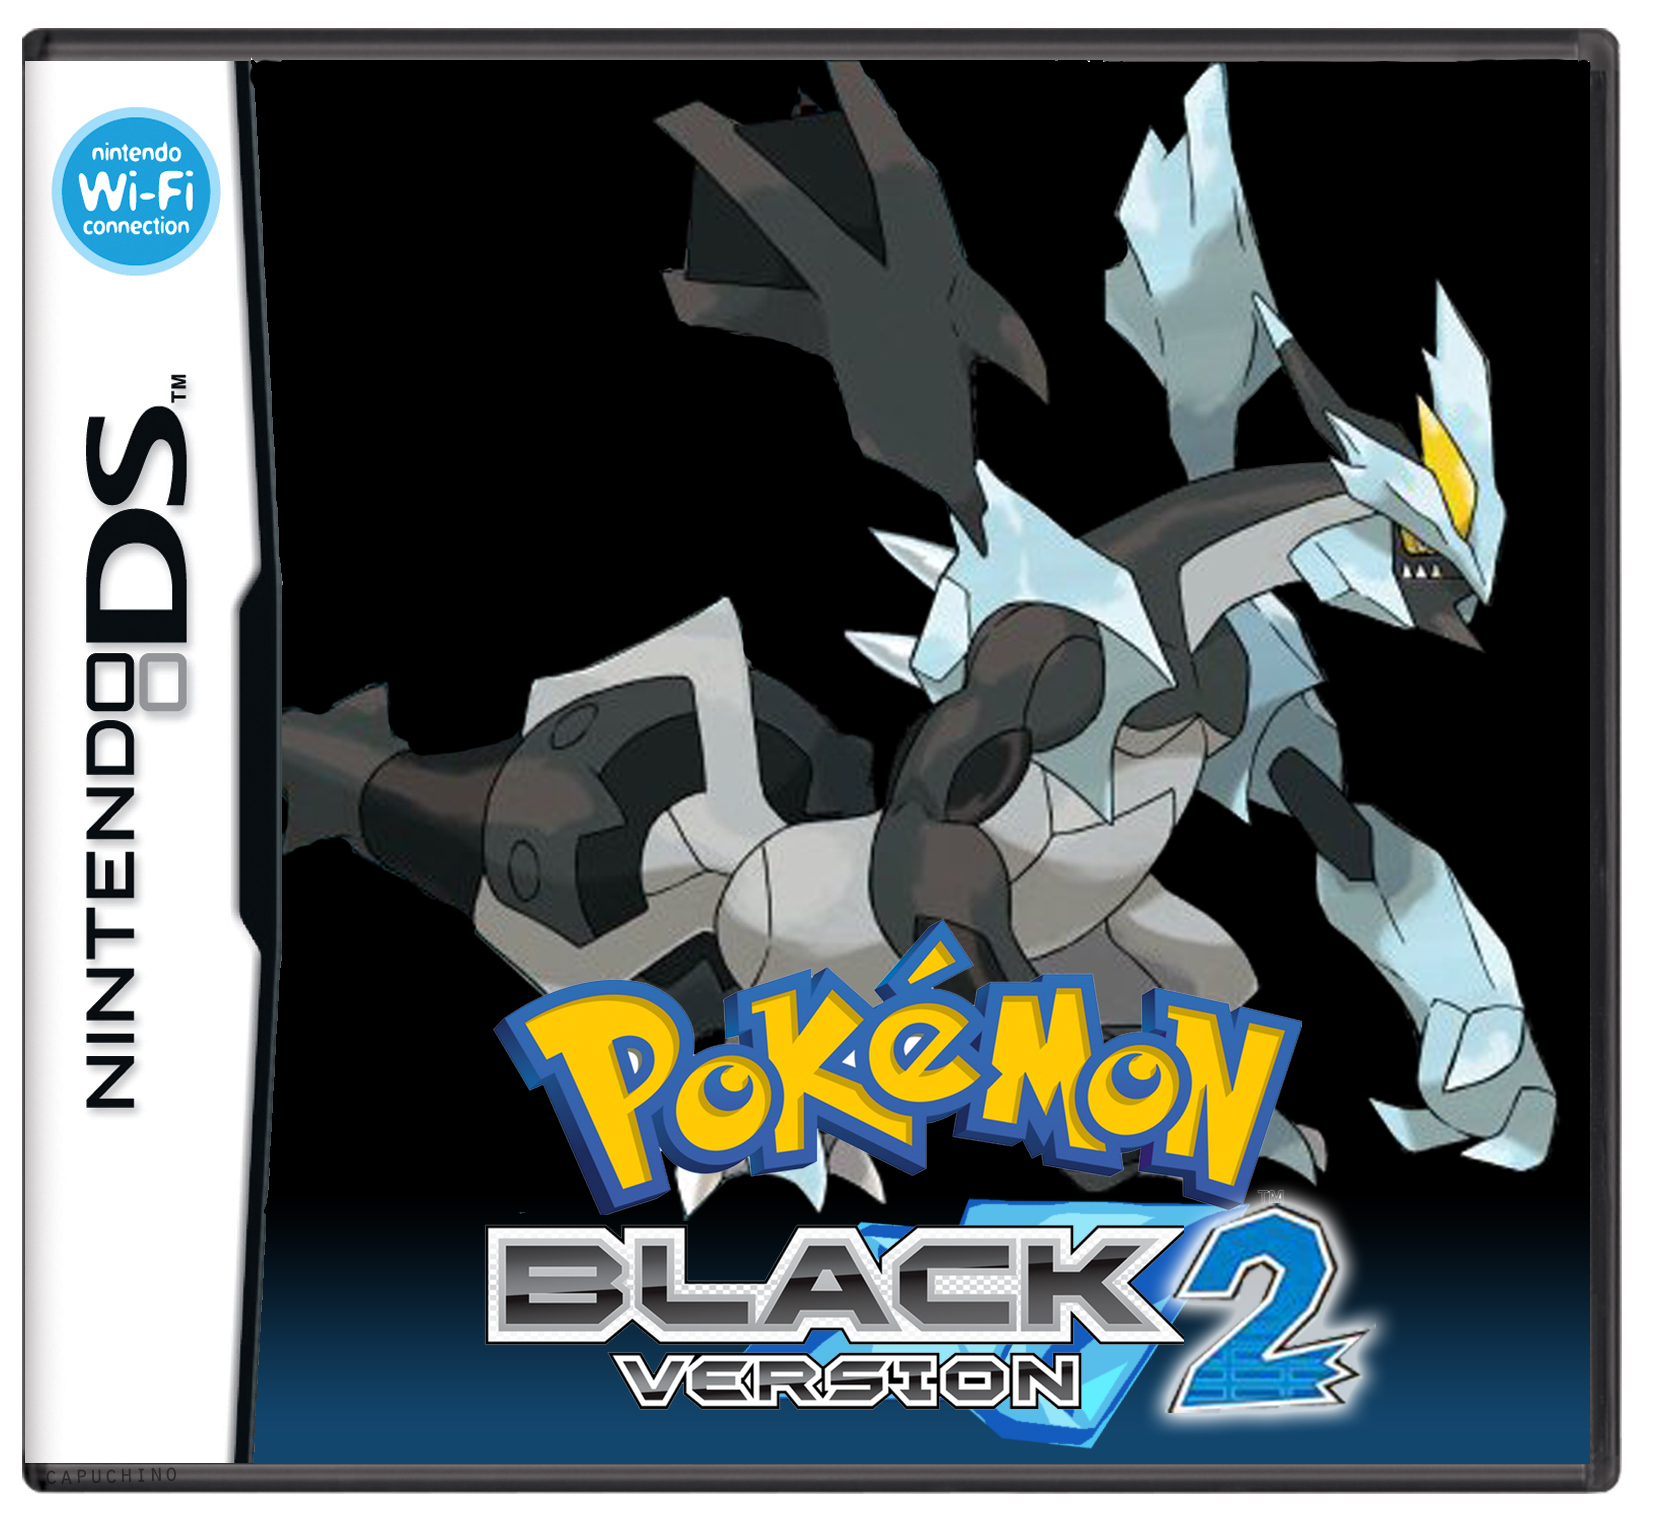 Pokemon Black And White 2 Has New Story And Features - My Nintendo News